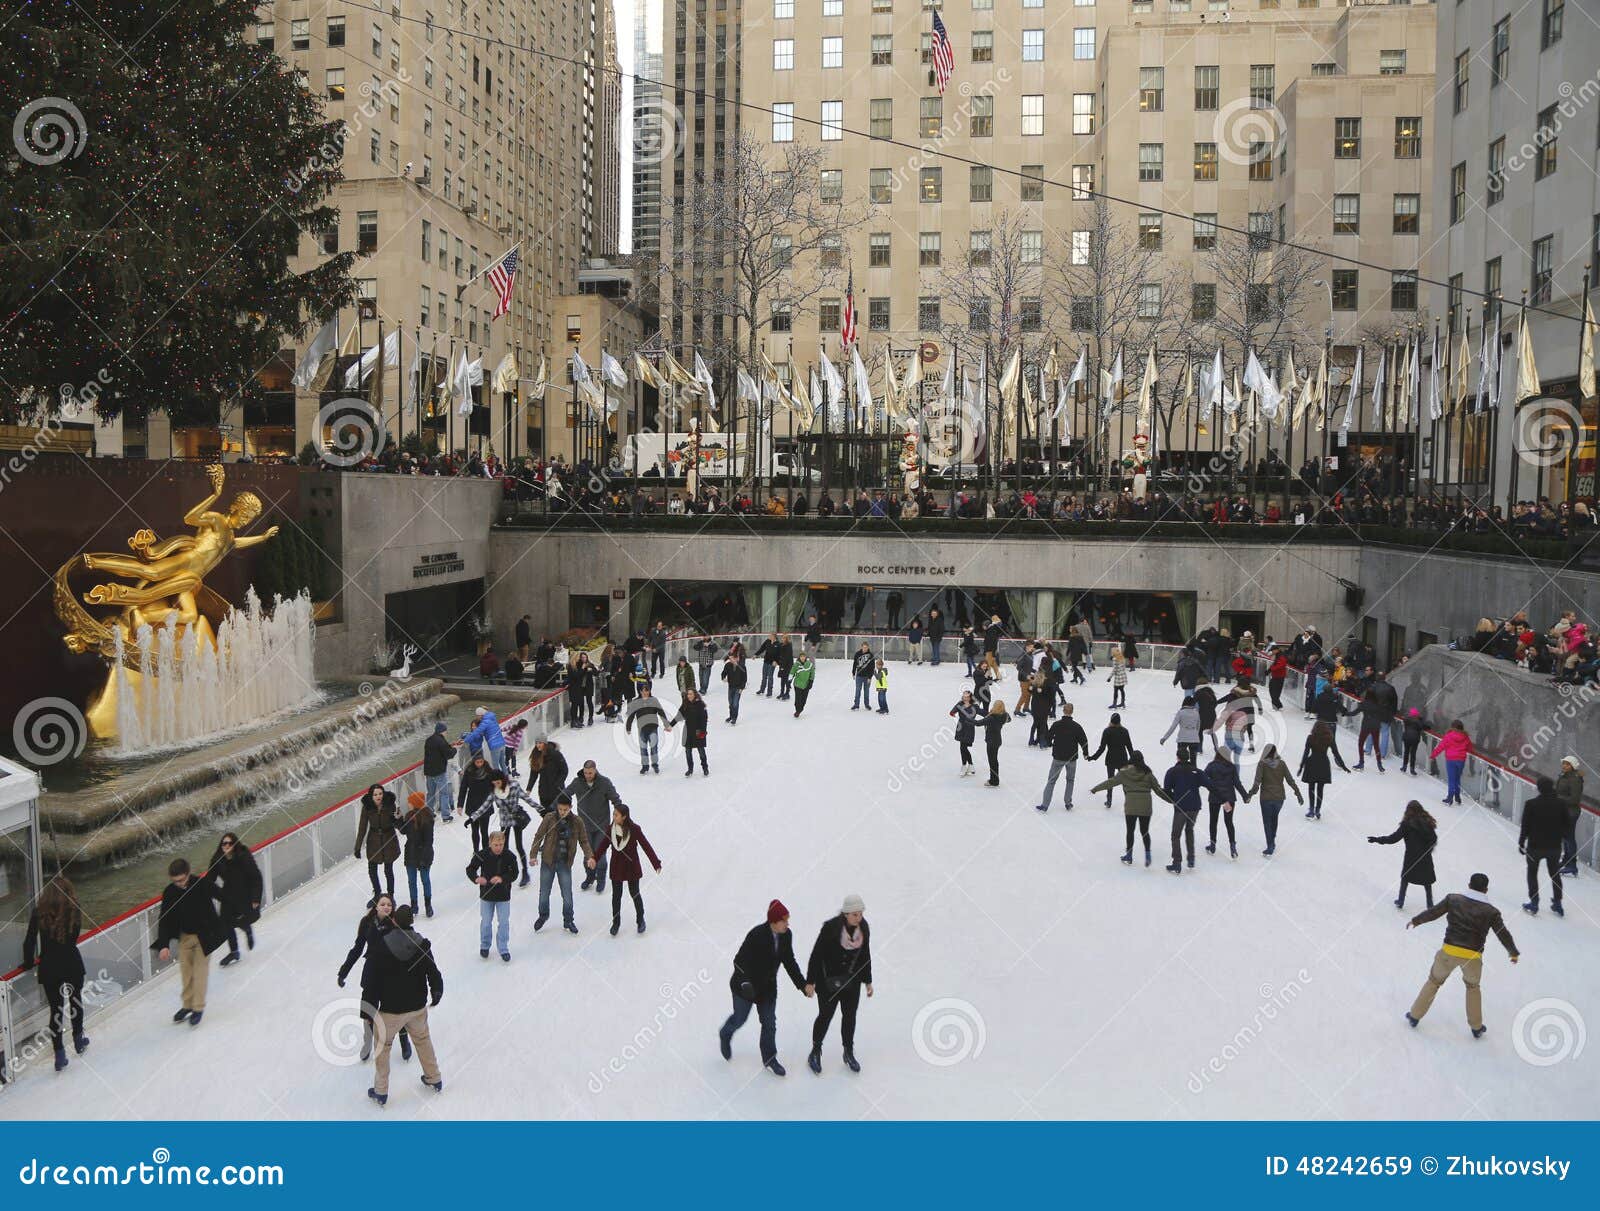 Lower Plaza Of Rockefeller Center With Ice-skating Rink And Christmas Tree In Midtown Manhattan ...